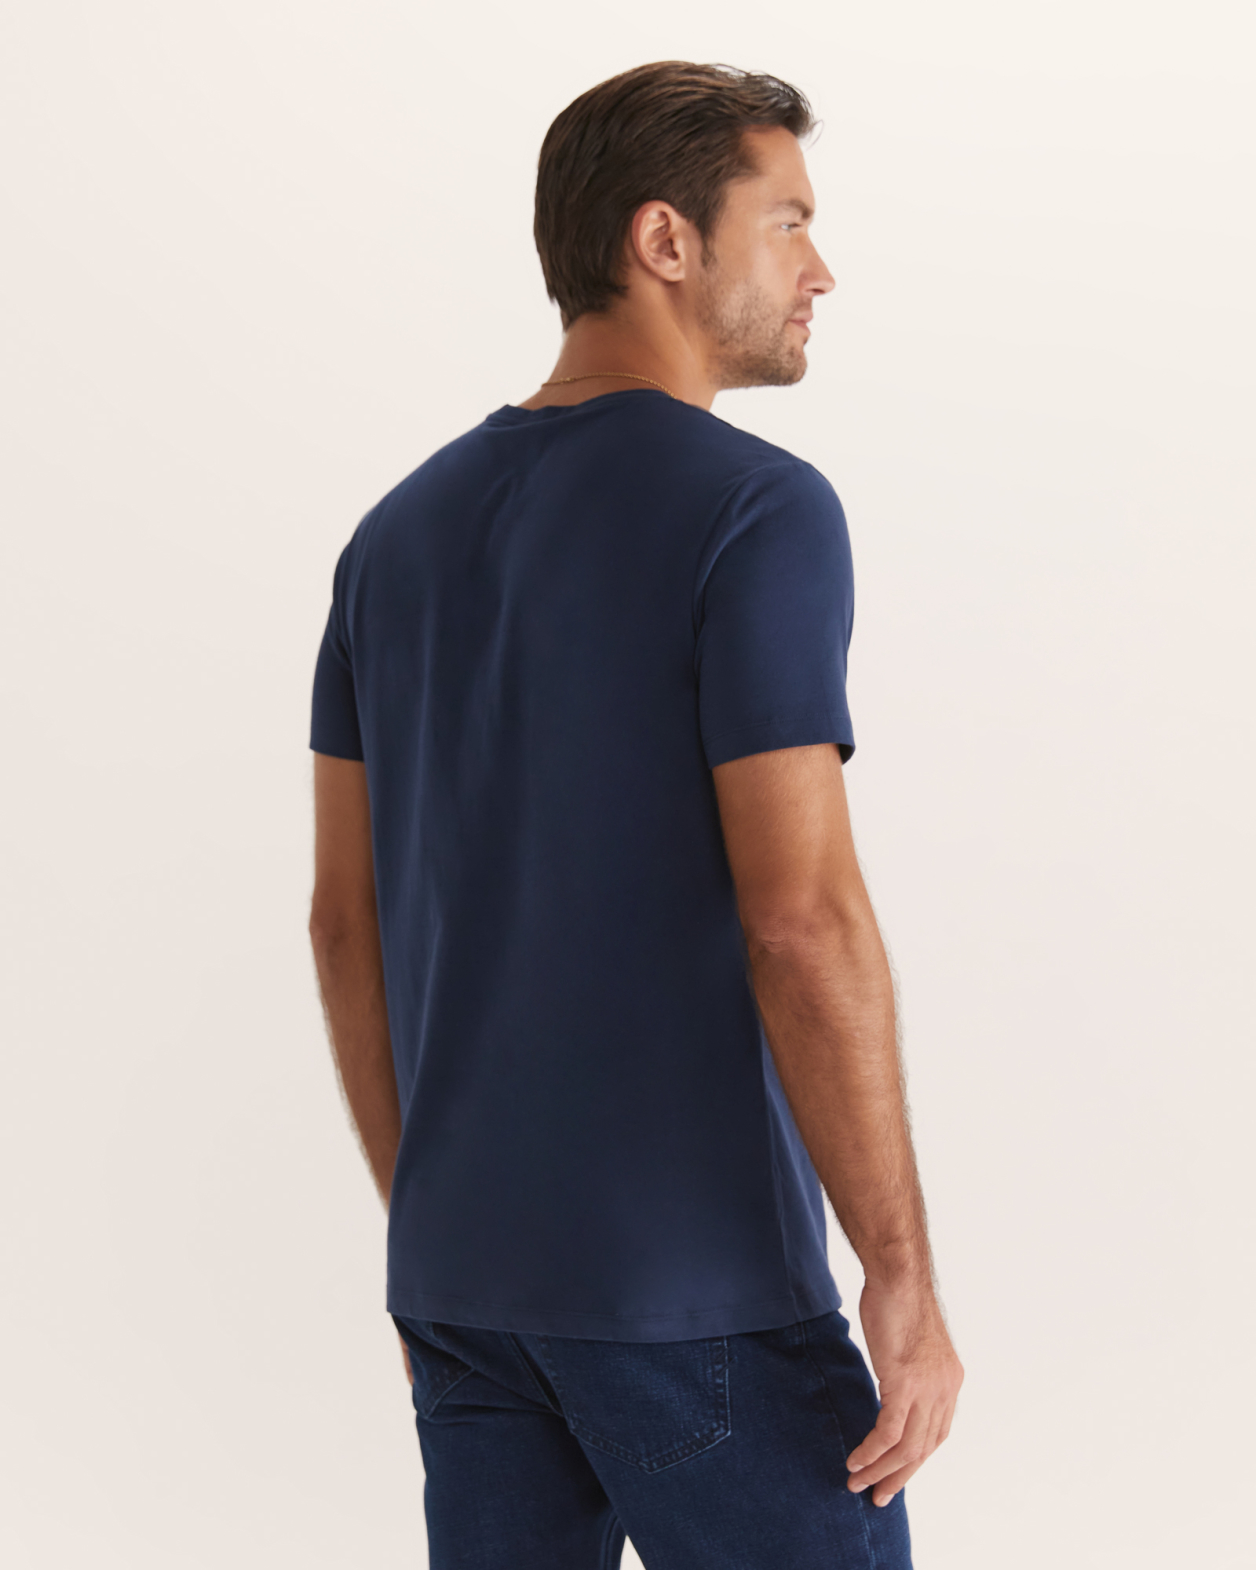 Super Soft Tee in FRENCH NAVY